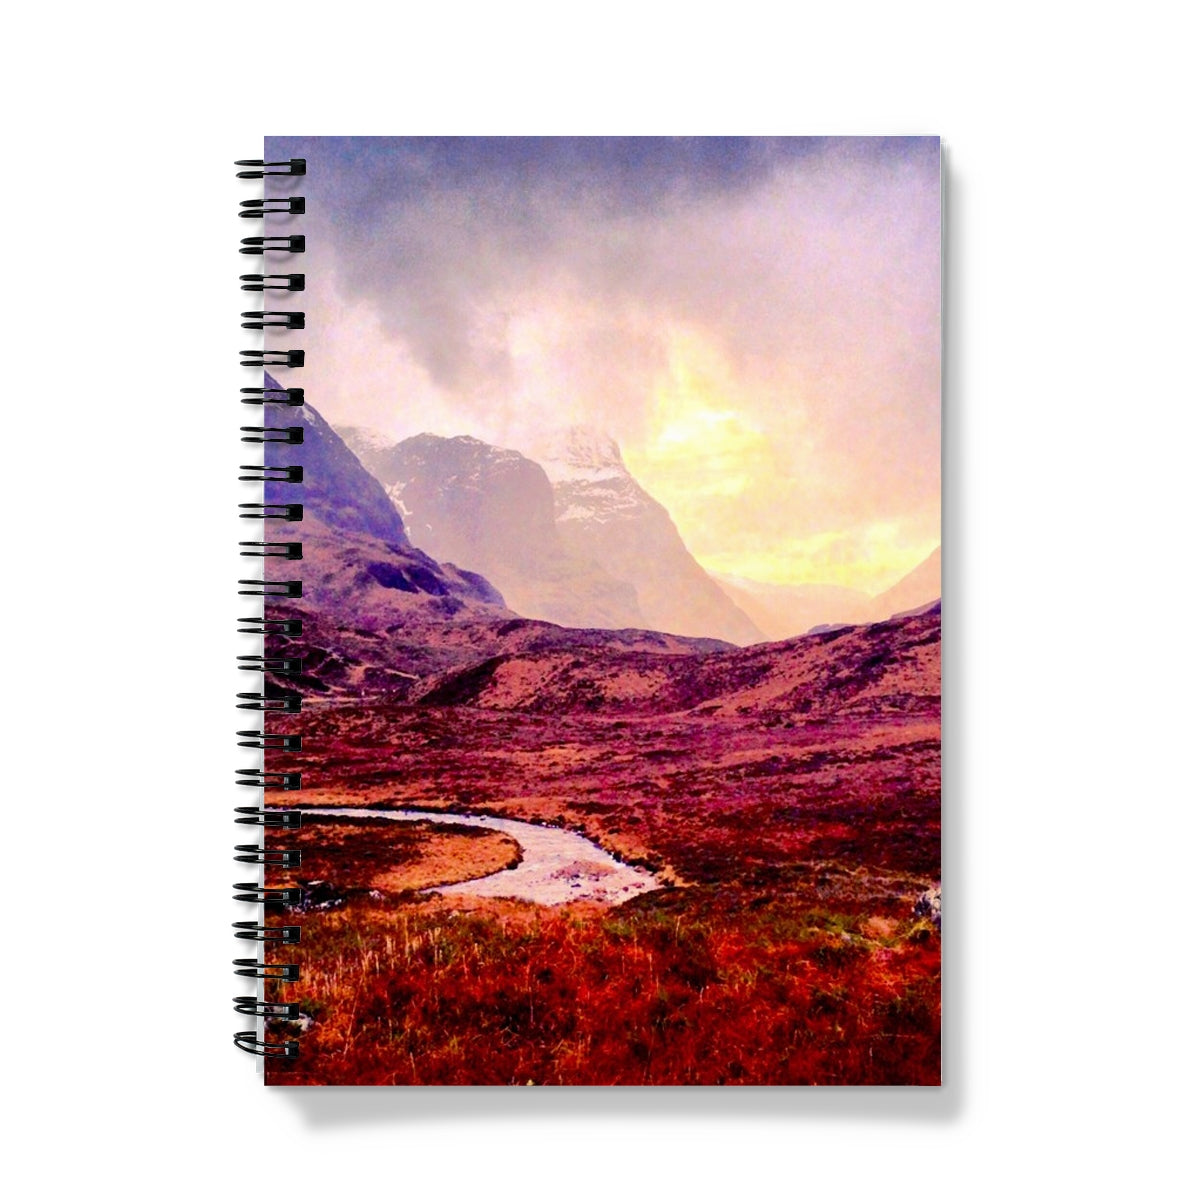 A Brooding Glencoe Art Gifts Notebook-Journals & Notebooks-Glencoe Art Gallery-A5-Graph-Paintings, Prints, Homeware, Art Gifts From Scotland By Scottish Artist Kevin Hunter